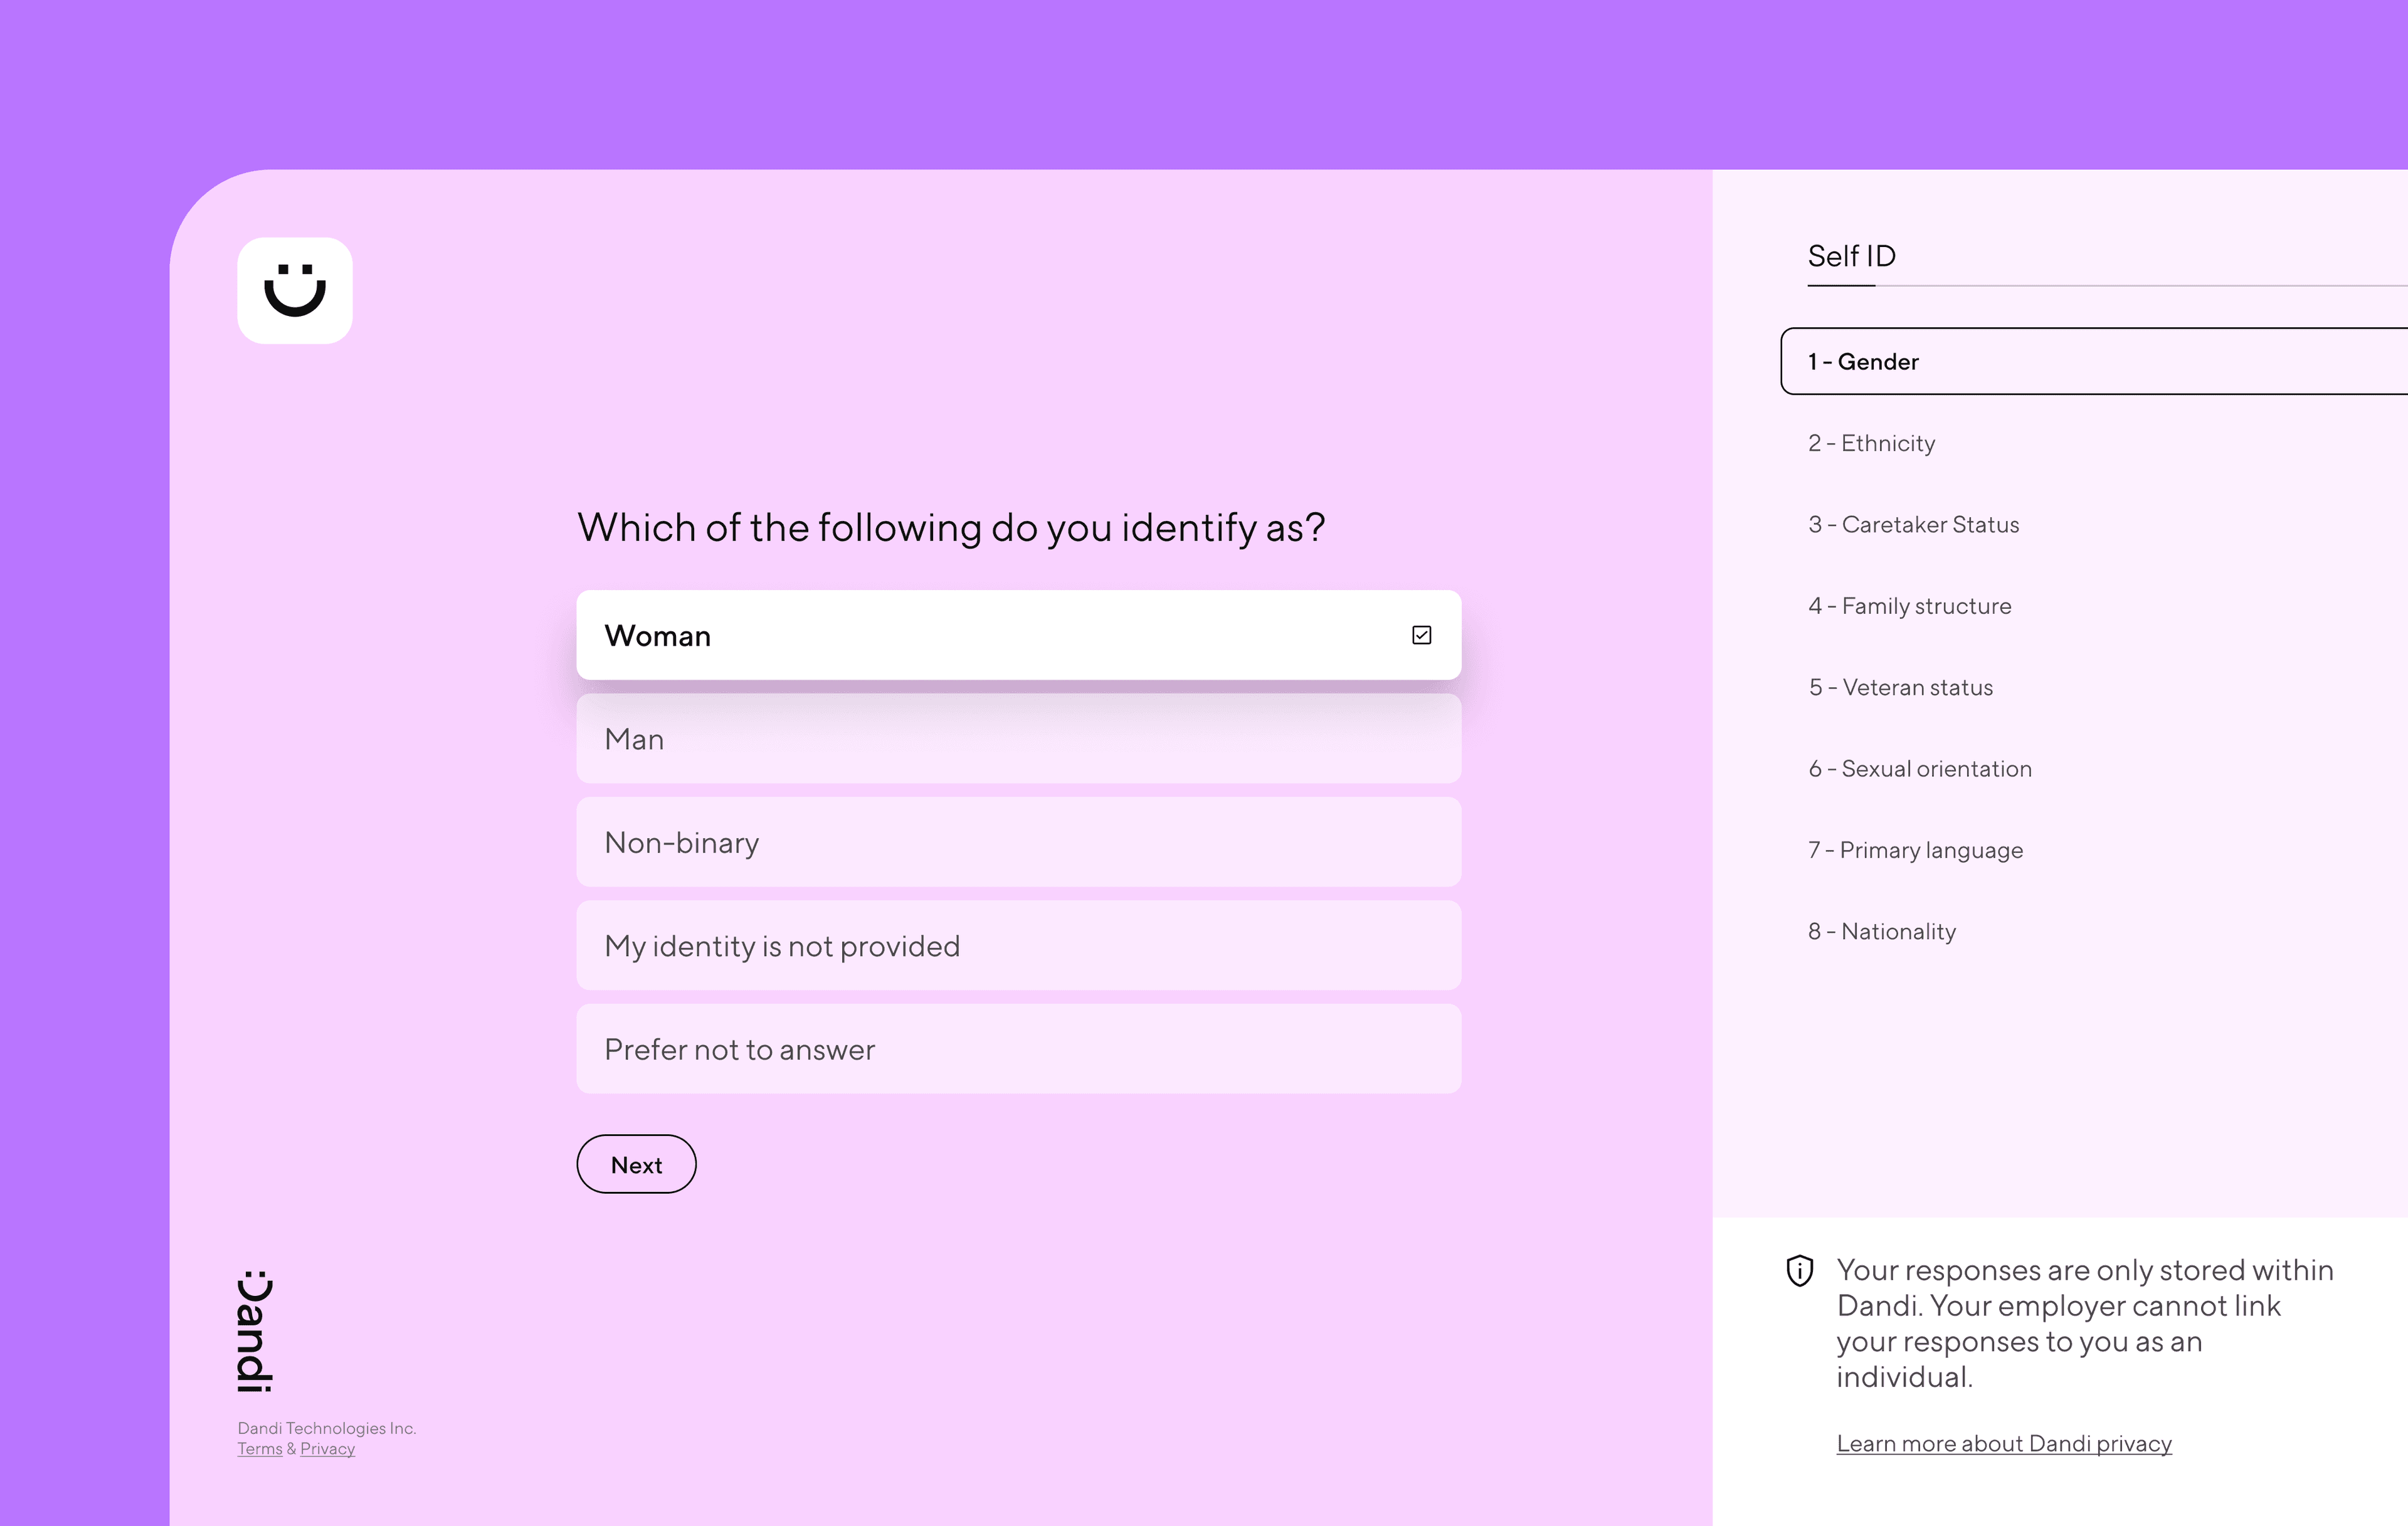 Sample Dandi Self-ID questionnaire an employee would see. The displayed question asks about gender identity. A menu on the right shows additional self-ID categories. The bottom right includes privacy information.